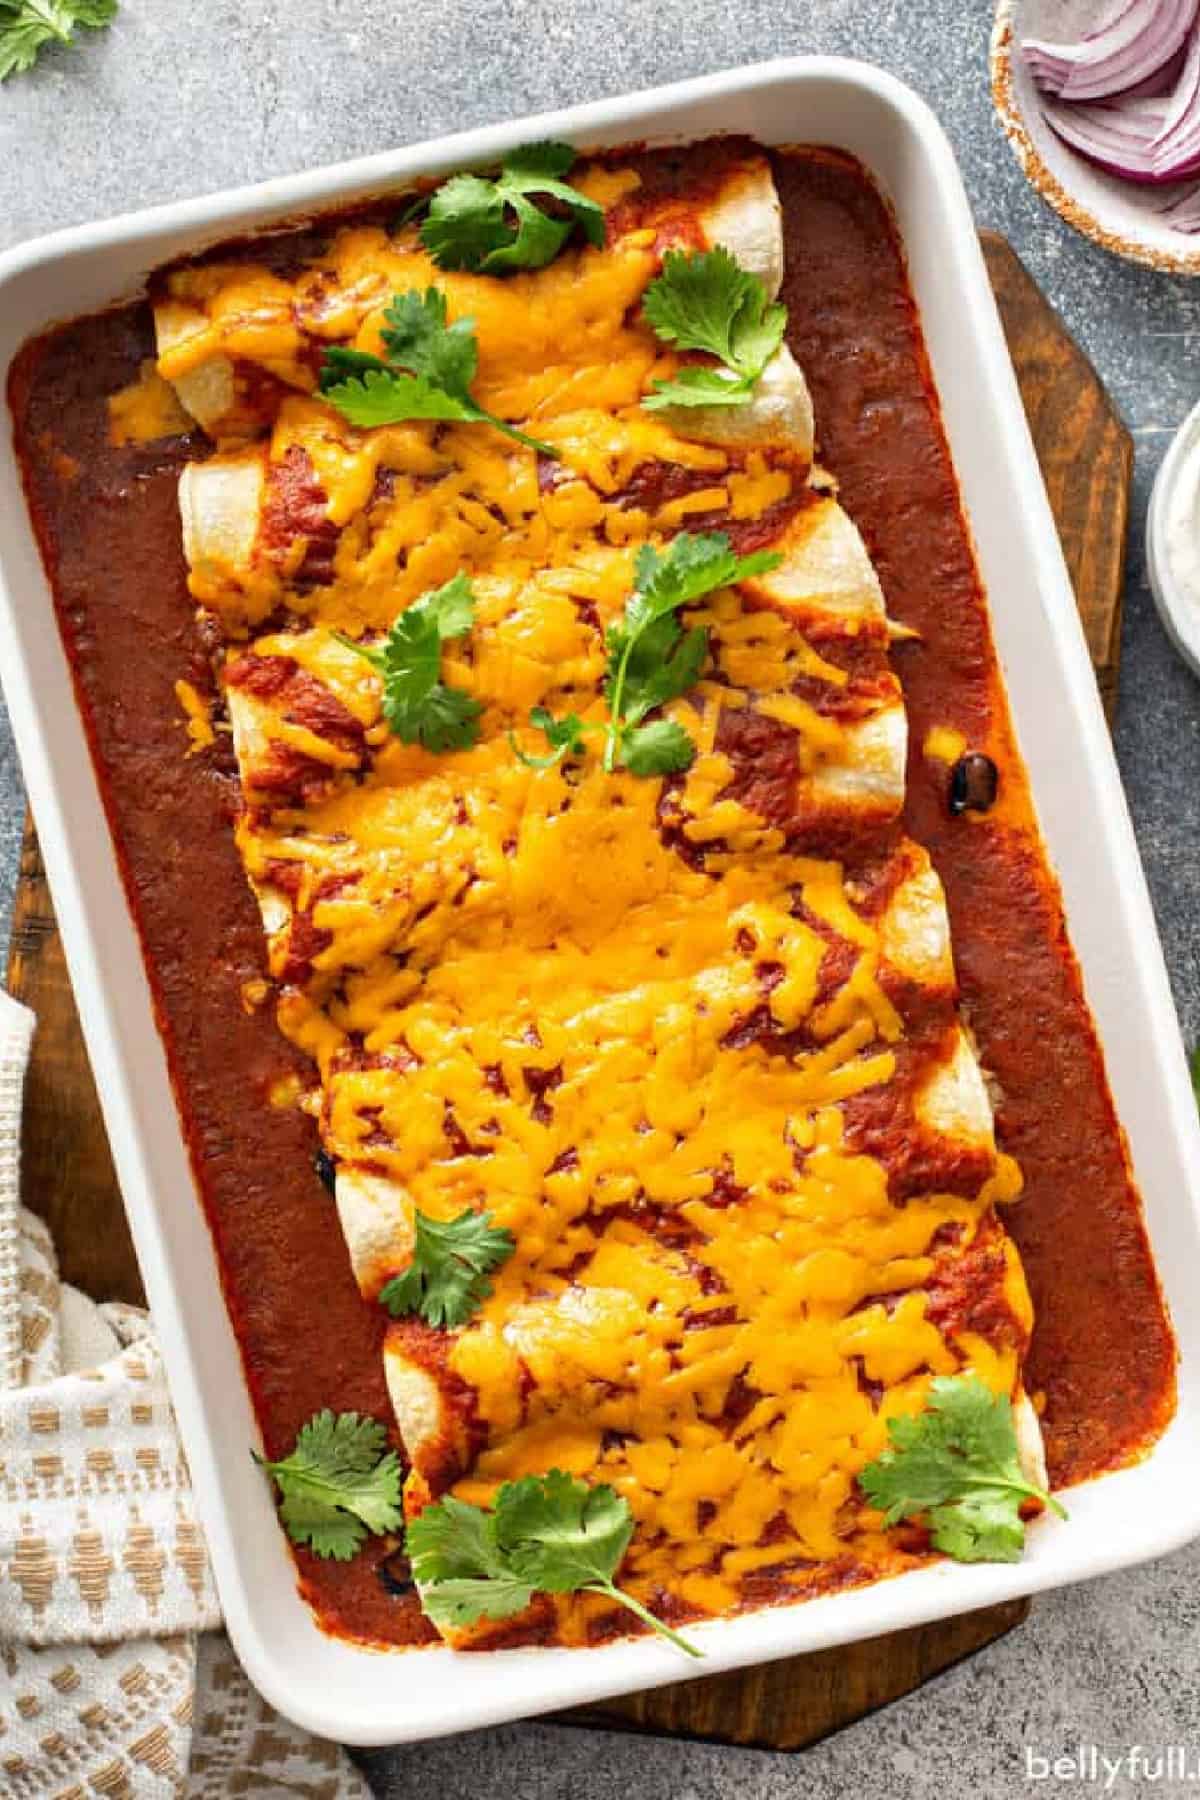 Chicken enchiladas covered in melted cheddar cheese in baking dish